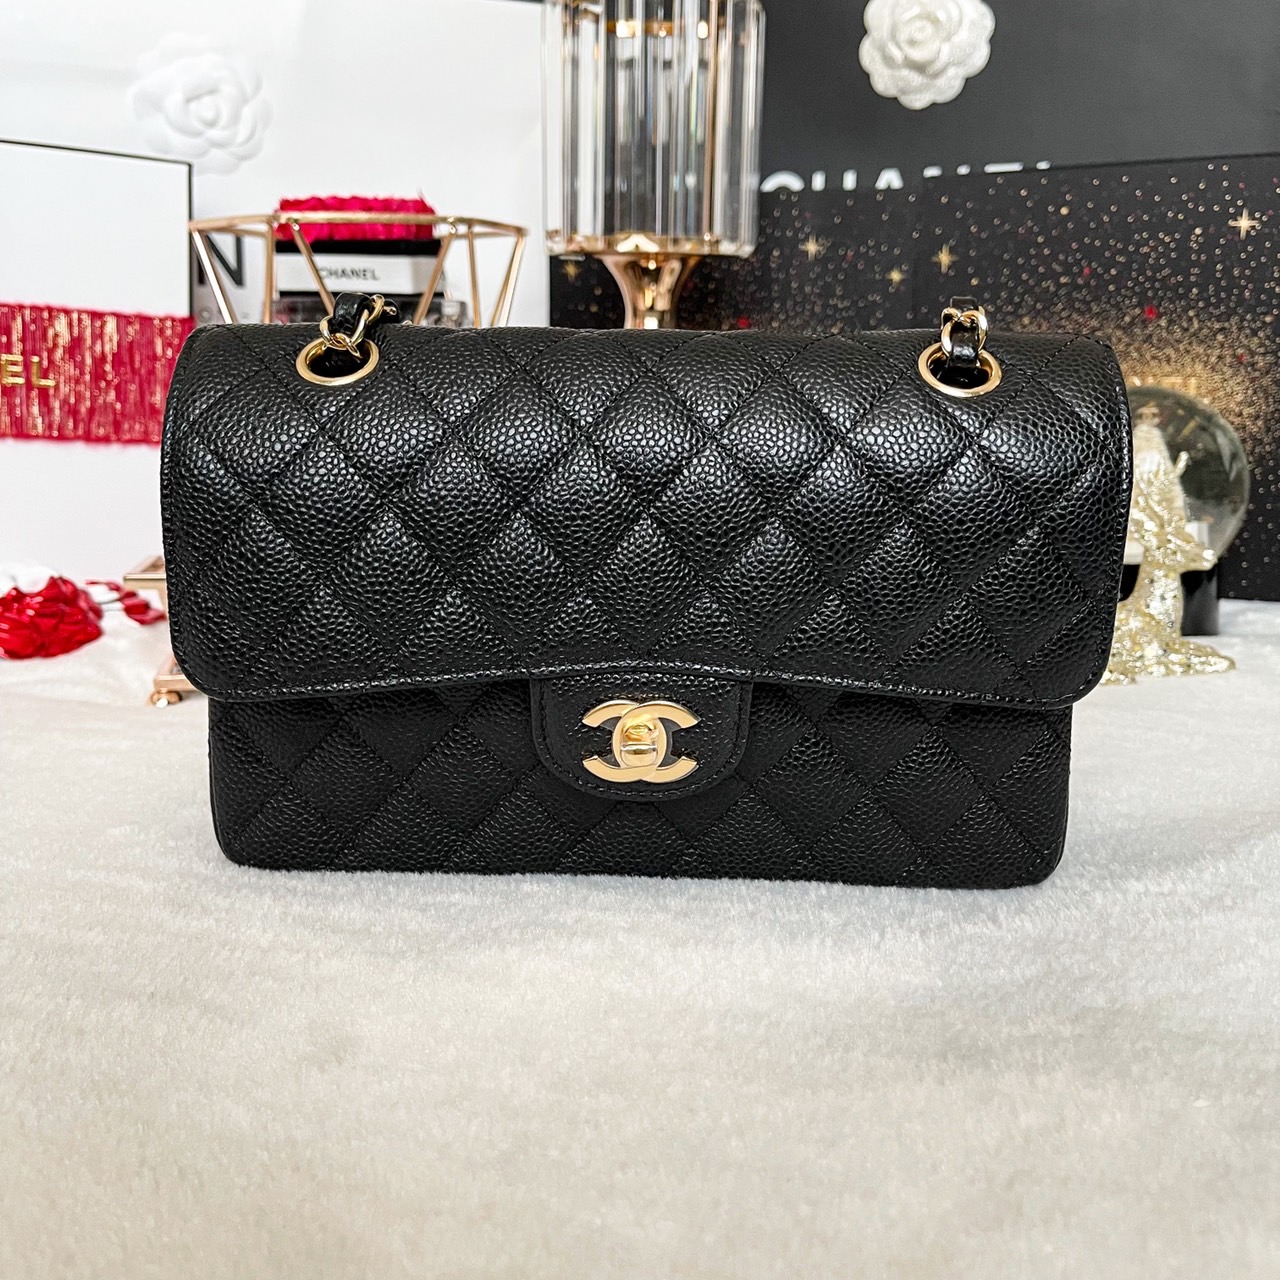 Chanel Vintage Chanel Classic 9 inch Black Quilted Leather Shoulder 